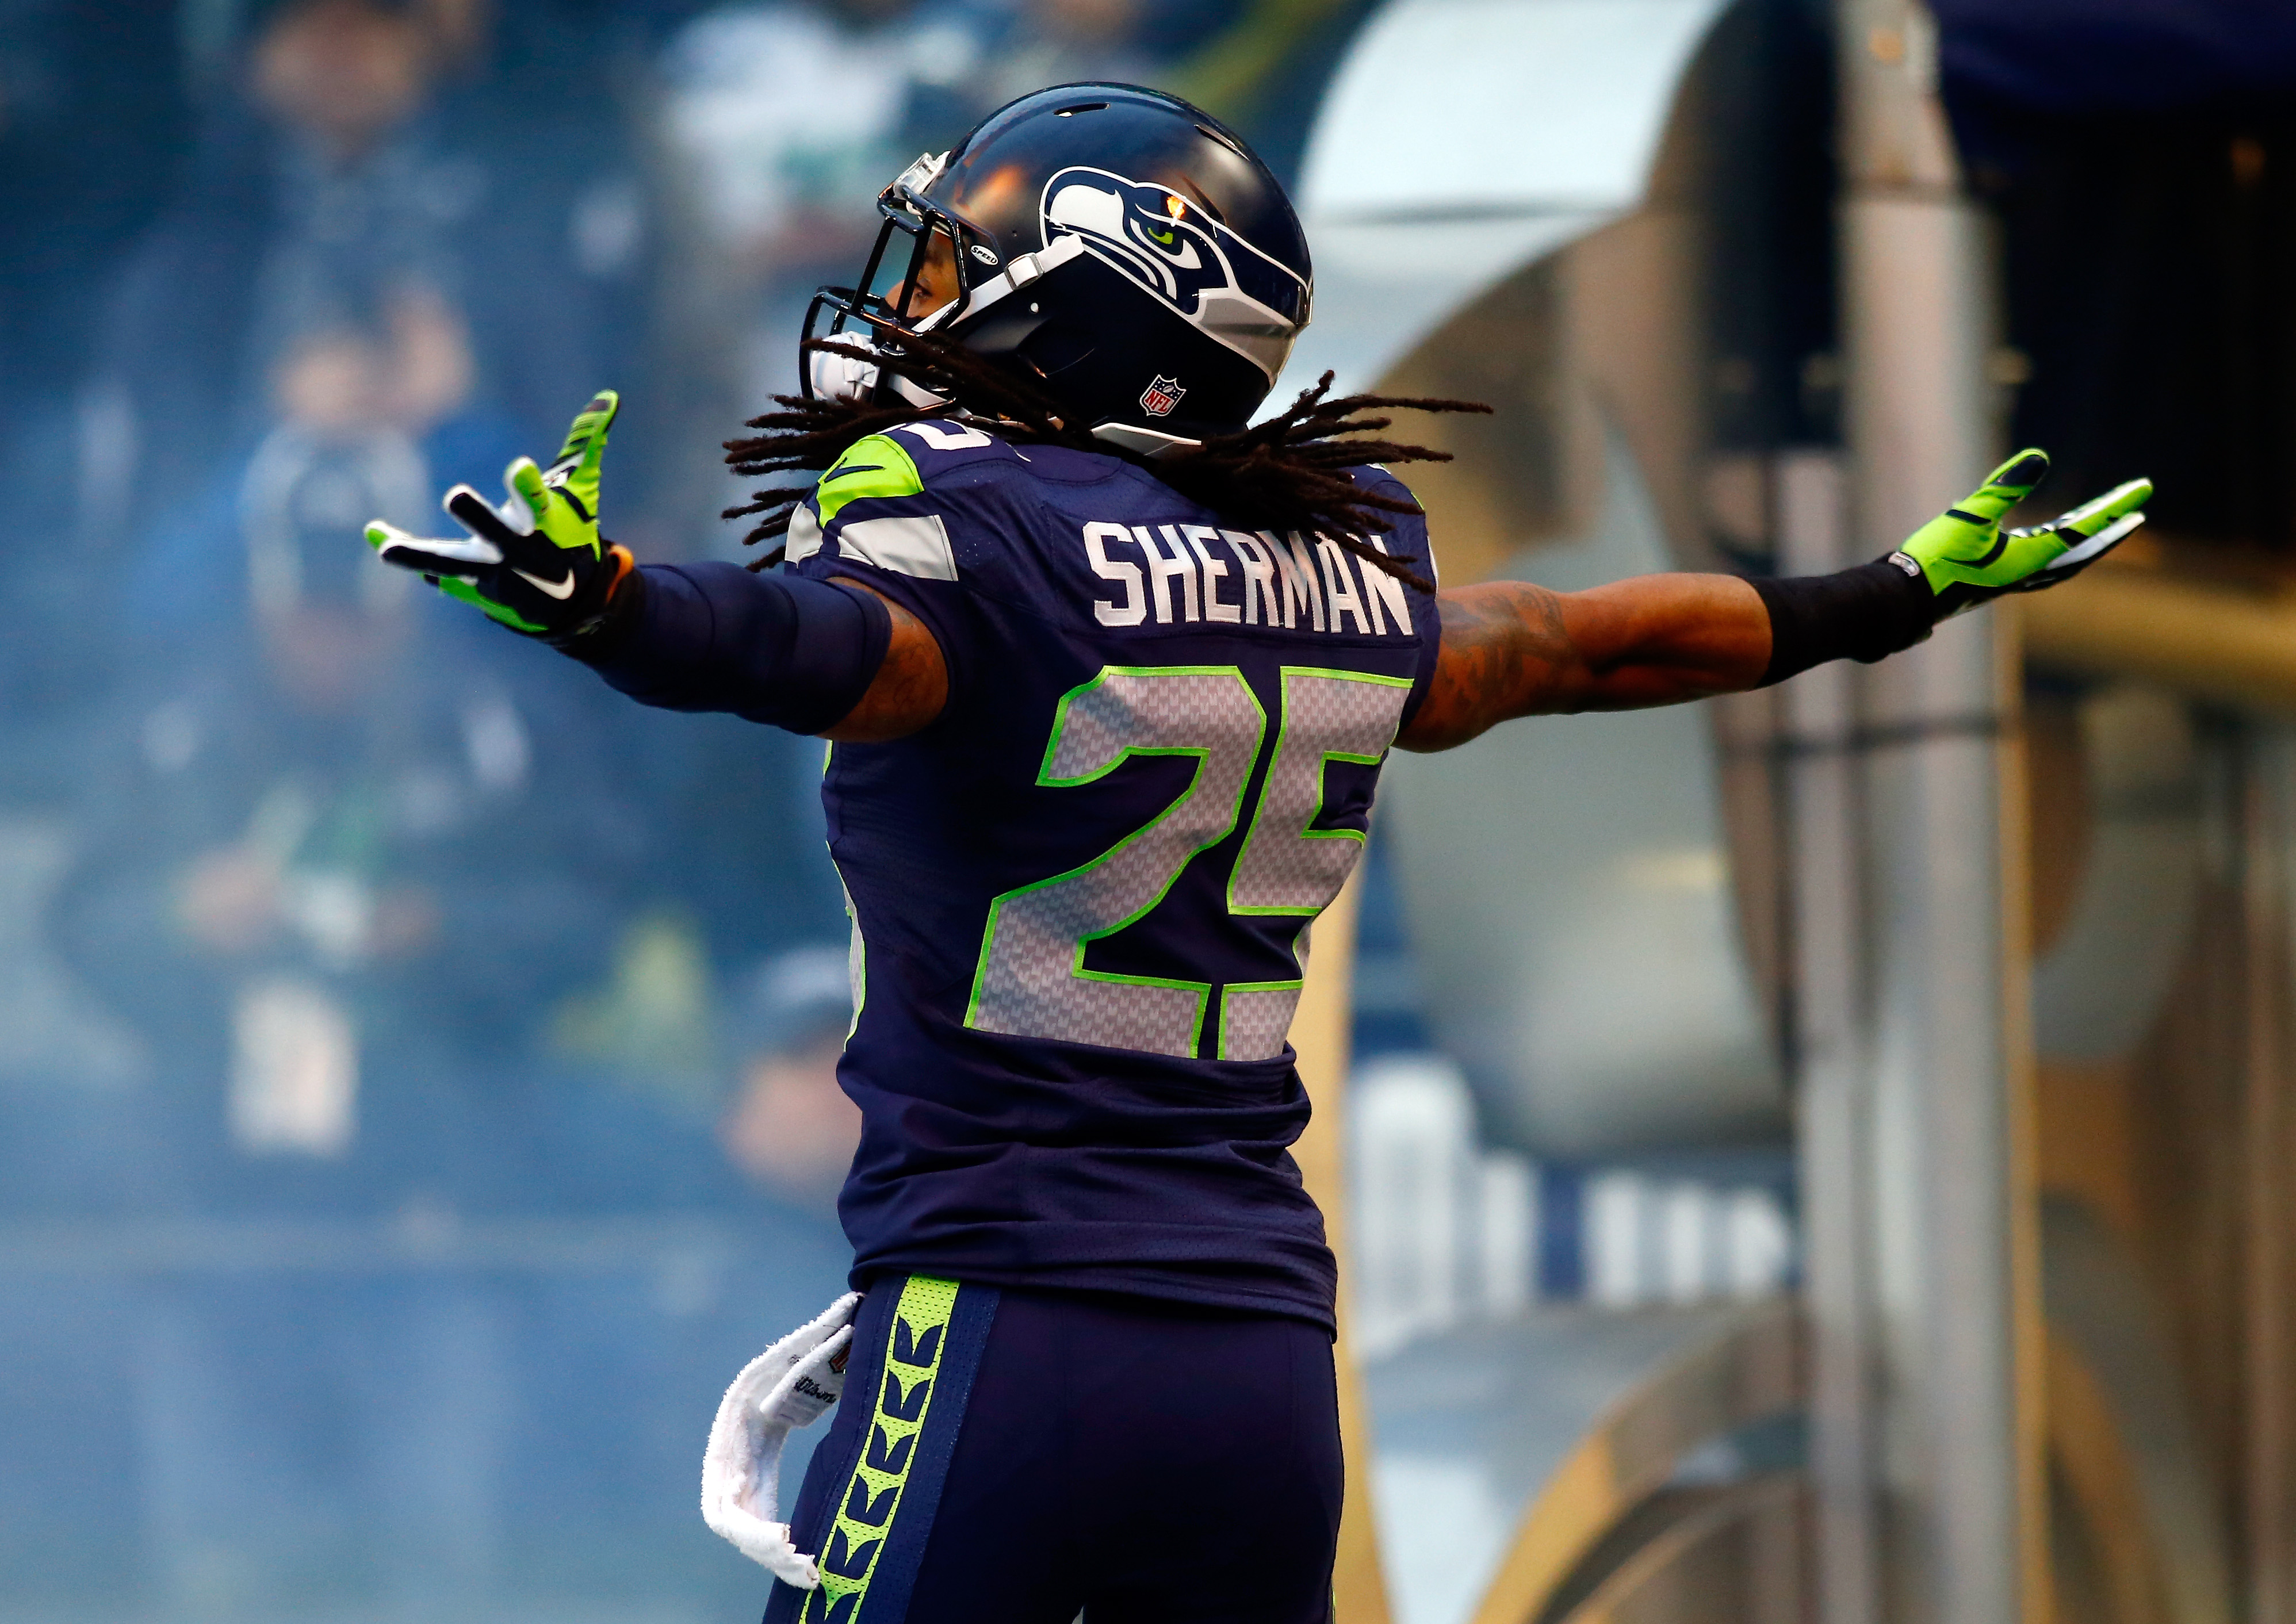 Cornerback Richard Sherman #25 of the Seattle Seahawks takes the field for the 2014 NFC Championship against the San Francisco 49ers at CenturyLink Field on January 19, 2014 in Seattle, Washington. (Jonathan Ferrey&mdash;Getty Images)